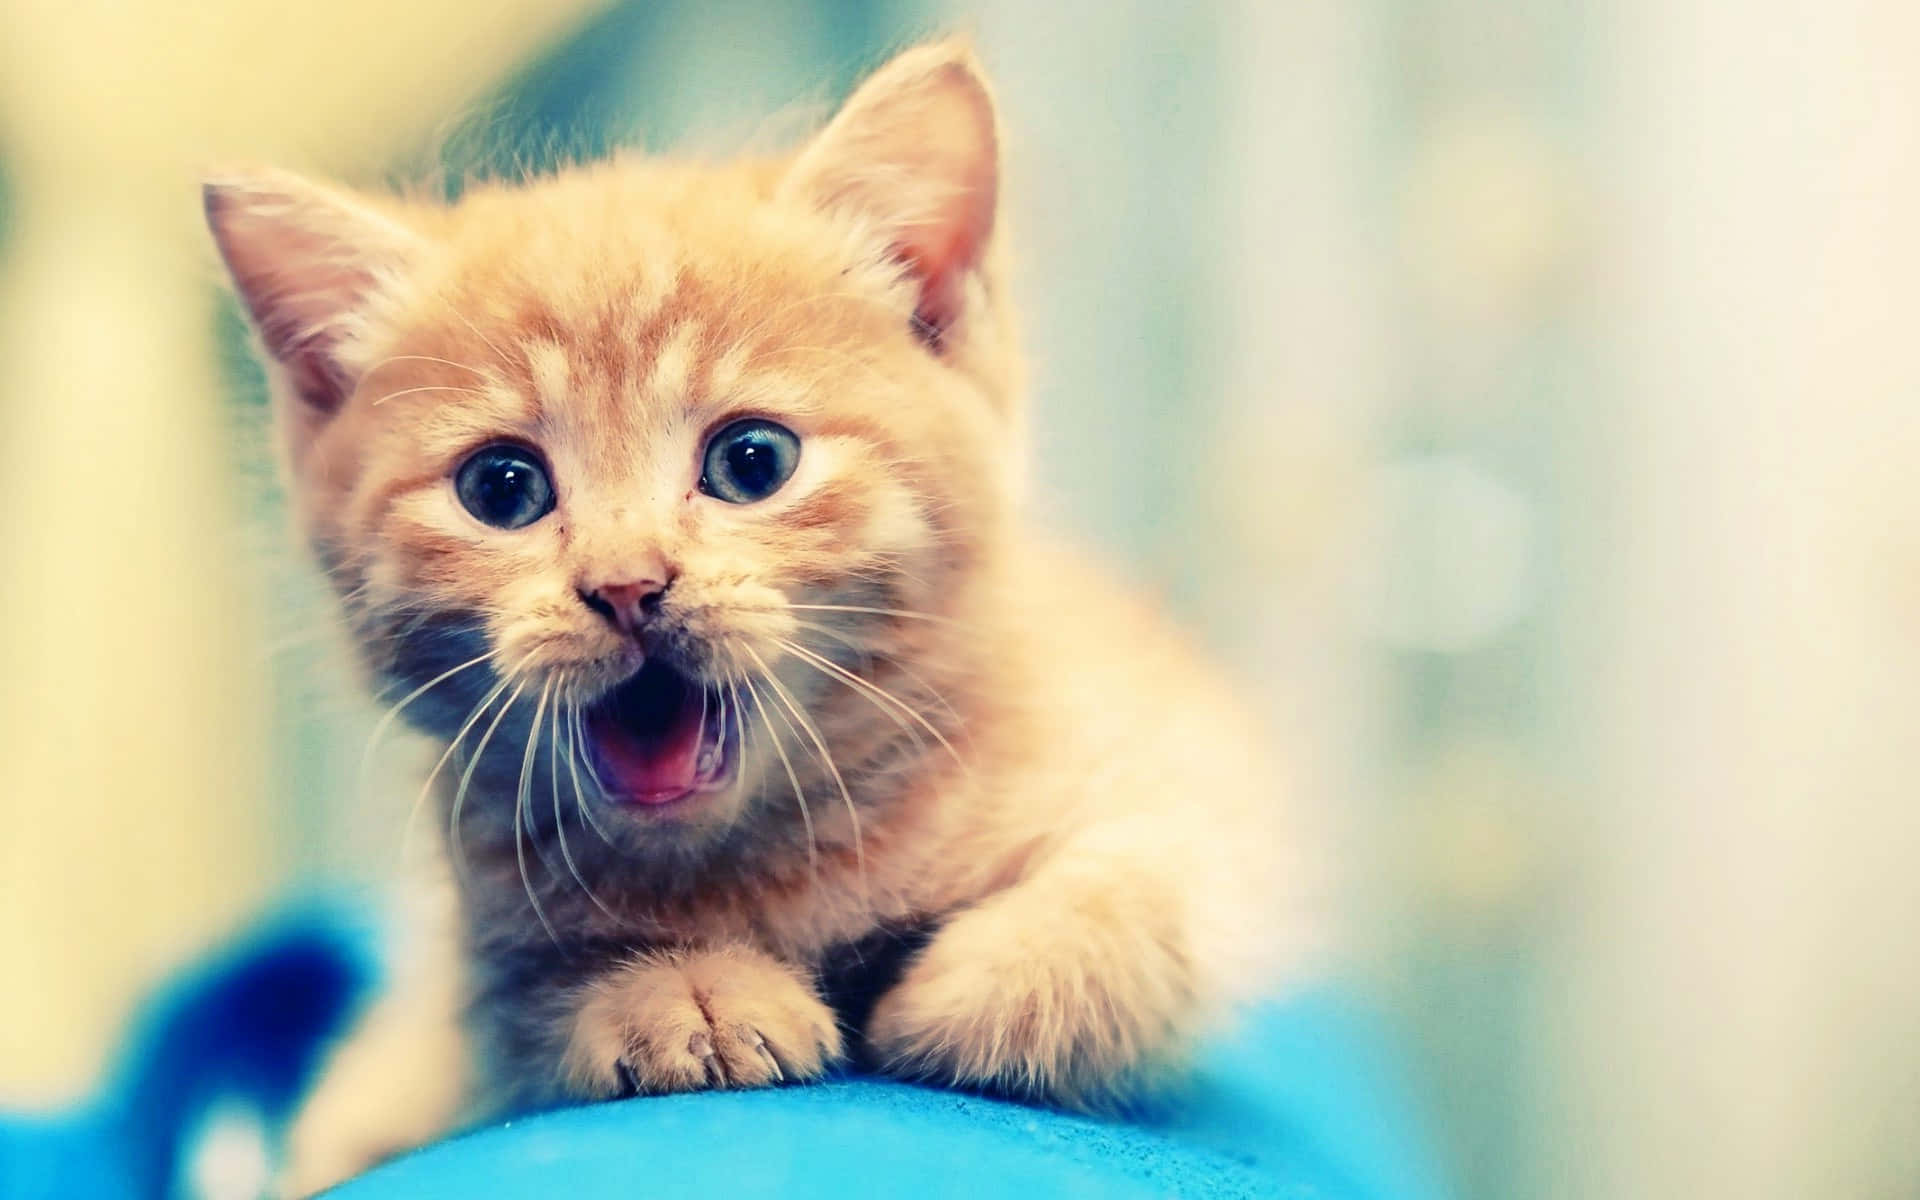 This cute kitty is ready for a cuddle!